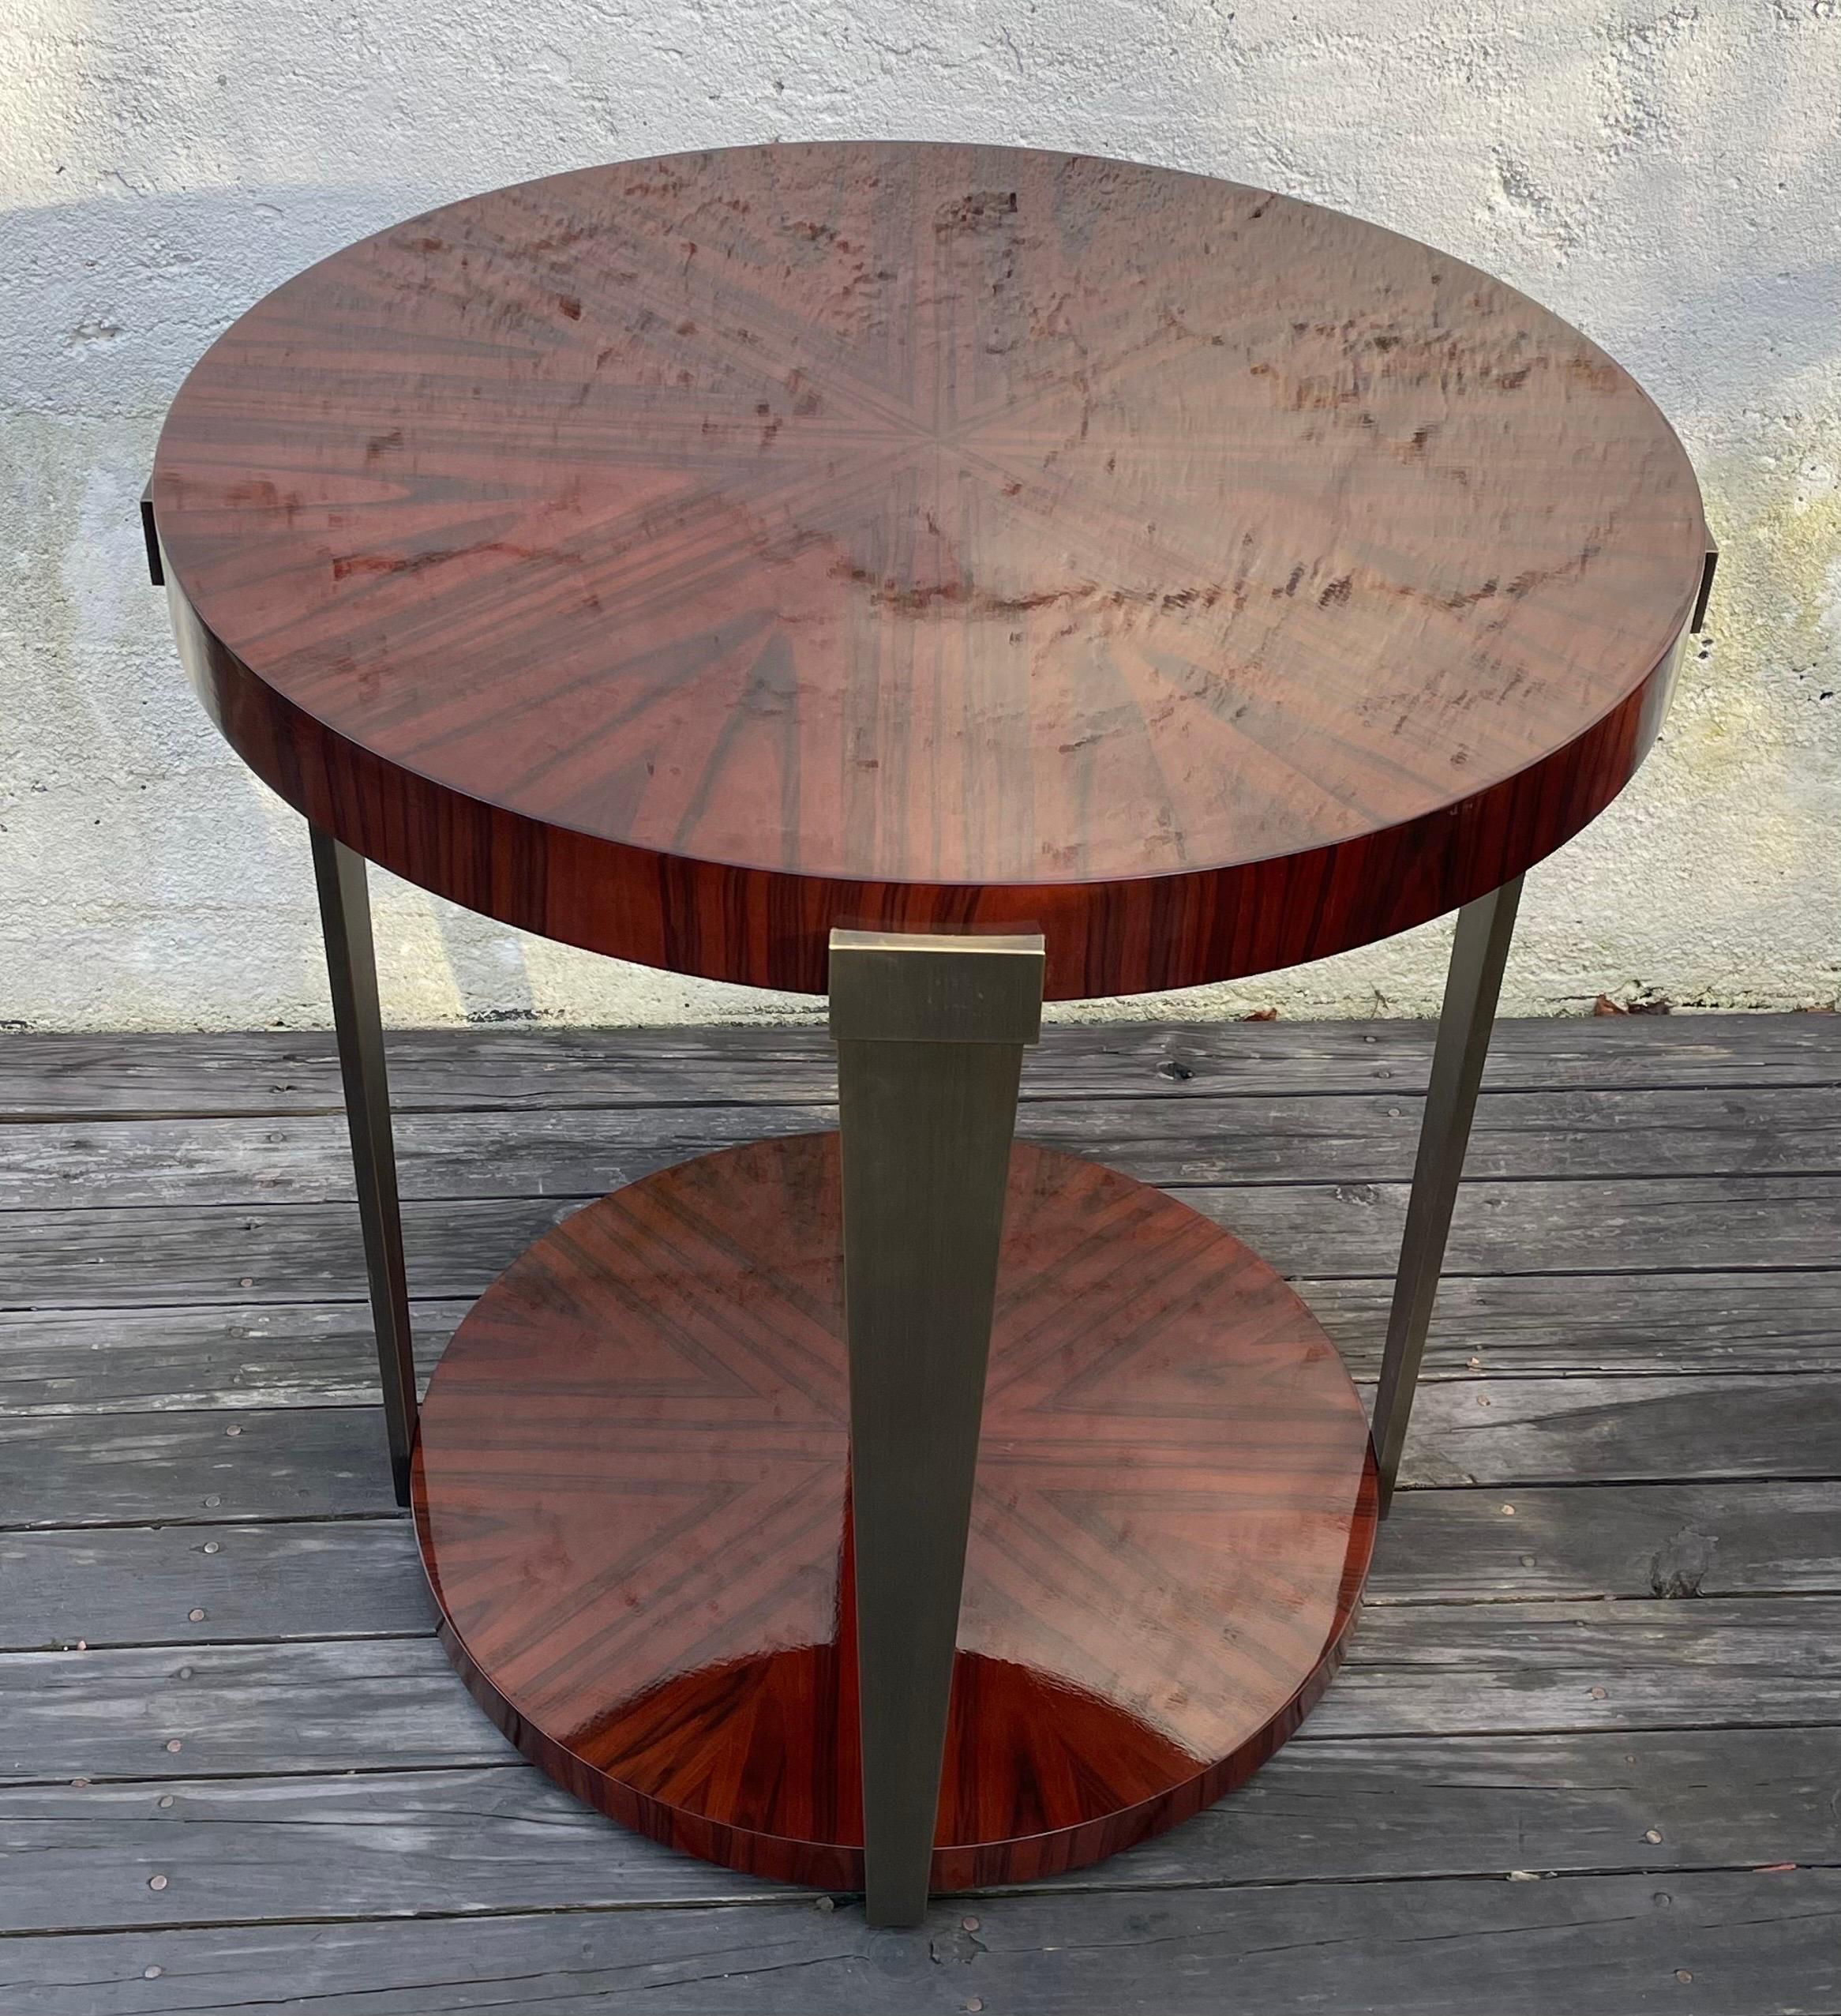 Beautiful Engineered Rosewood round foyer table designed by John Black for Decca home.

John Black is a furniture designer and founder of the creative design firm that bears his name, J Black Design. John Black is the creative visionary behind some